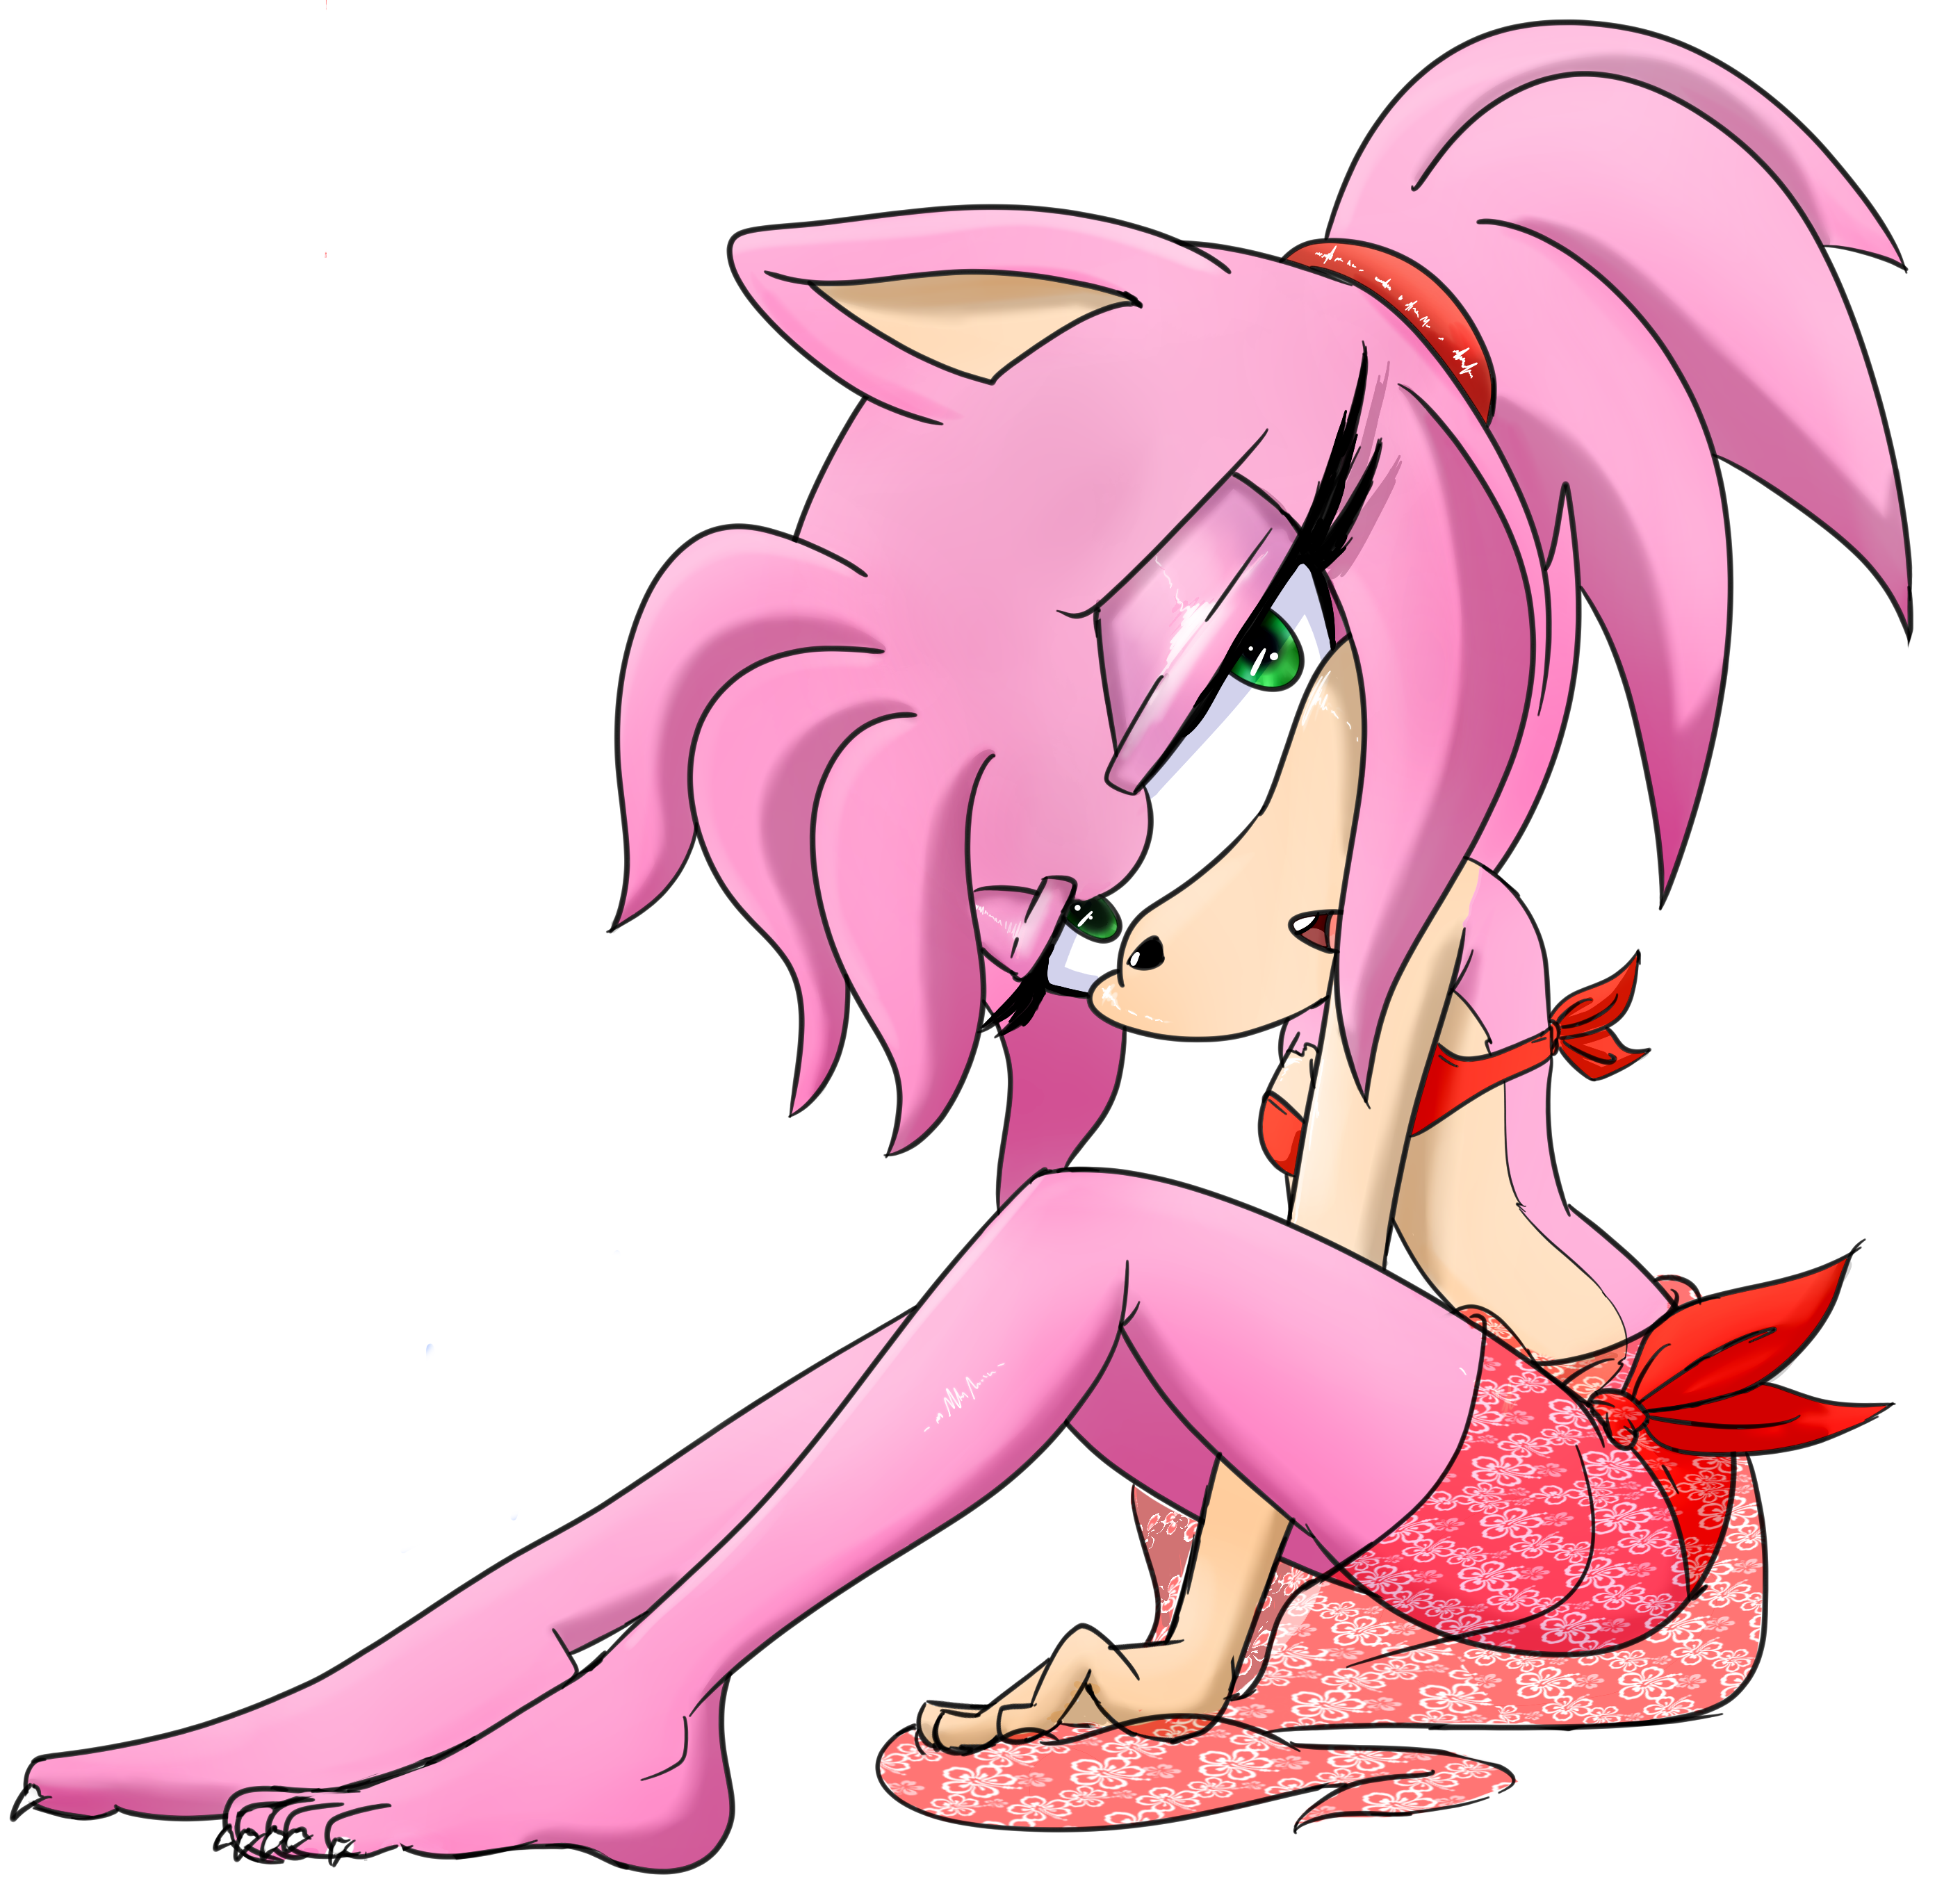 It's that time again - Amy Rose by GC-Mia -- Fur Affinity dot net.